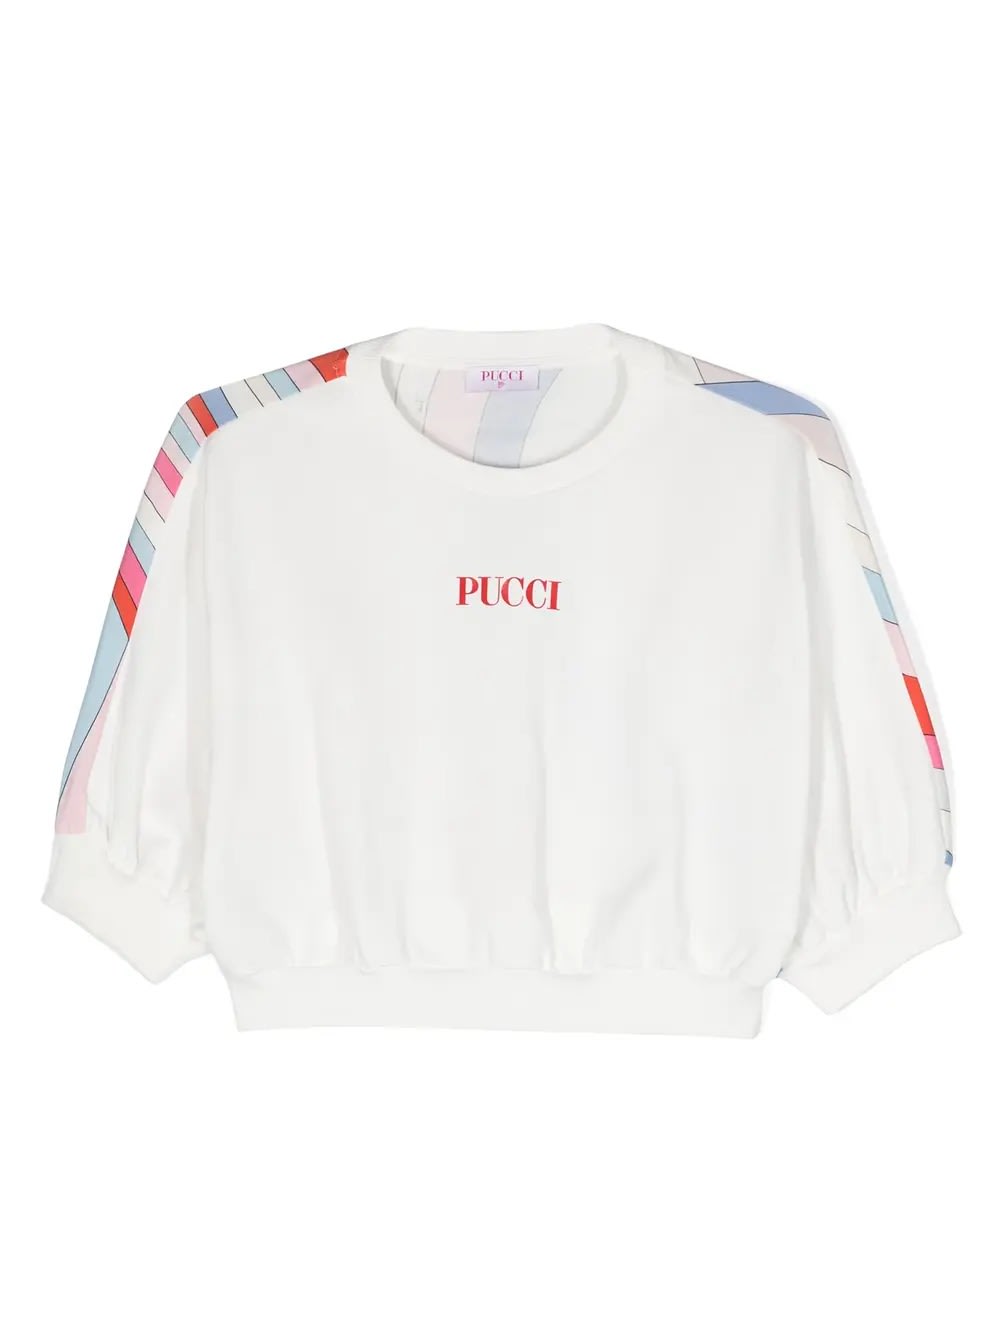 Pucci Kids' White Sweatshirt With Front Logo And Back Iride Print